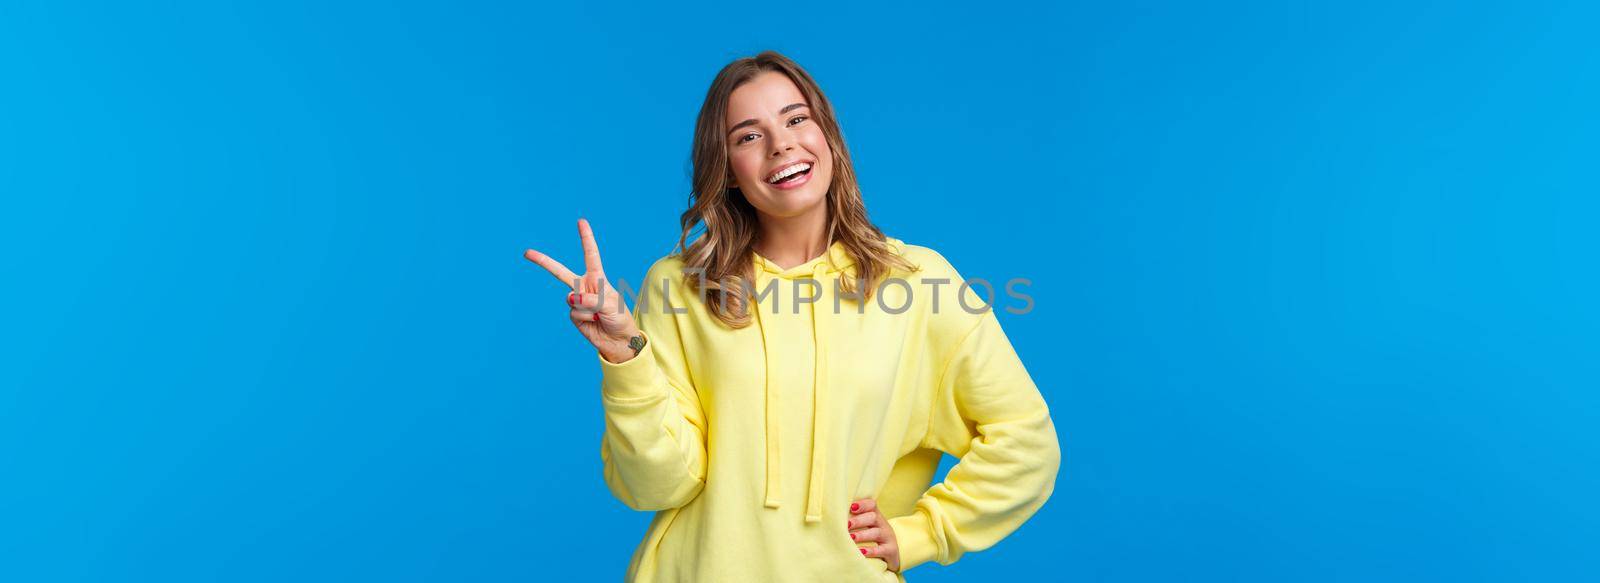 Staying bright sie. Carefree happy young silly blond girl in yellow hoodie sending positive vibes, show kawaii peace sign and smiling with white teeth, standing blue background.